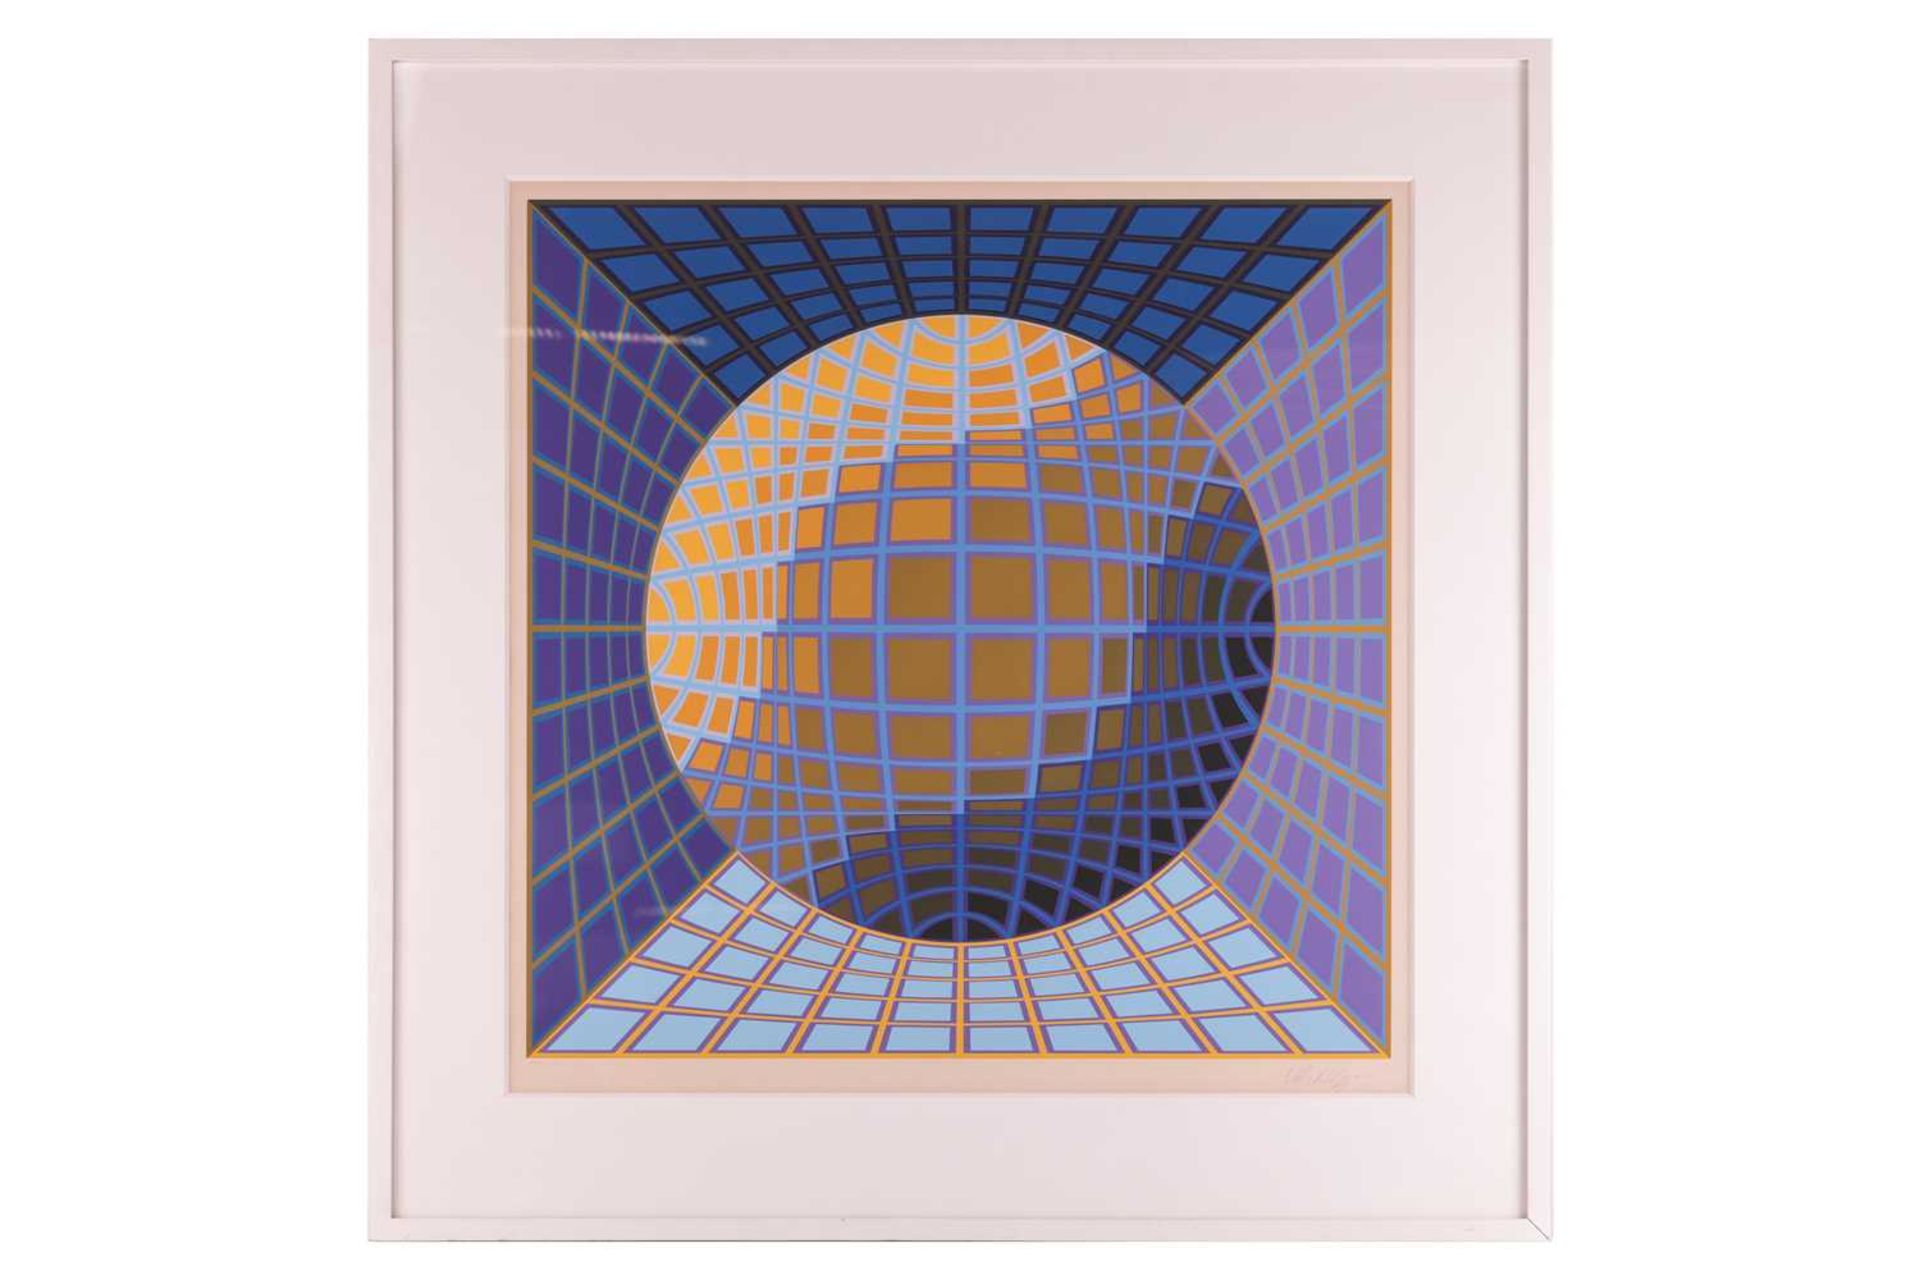 Victor Vasarely (Franco-Hungarian, 1906-1997), Dauve (1979), signed in pencil (lower right) numbered